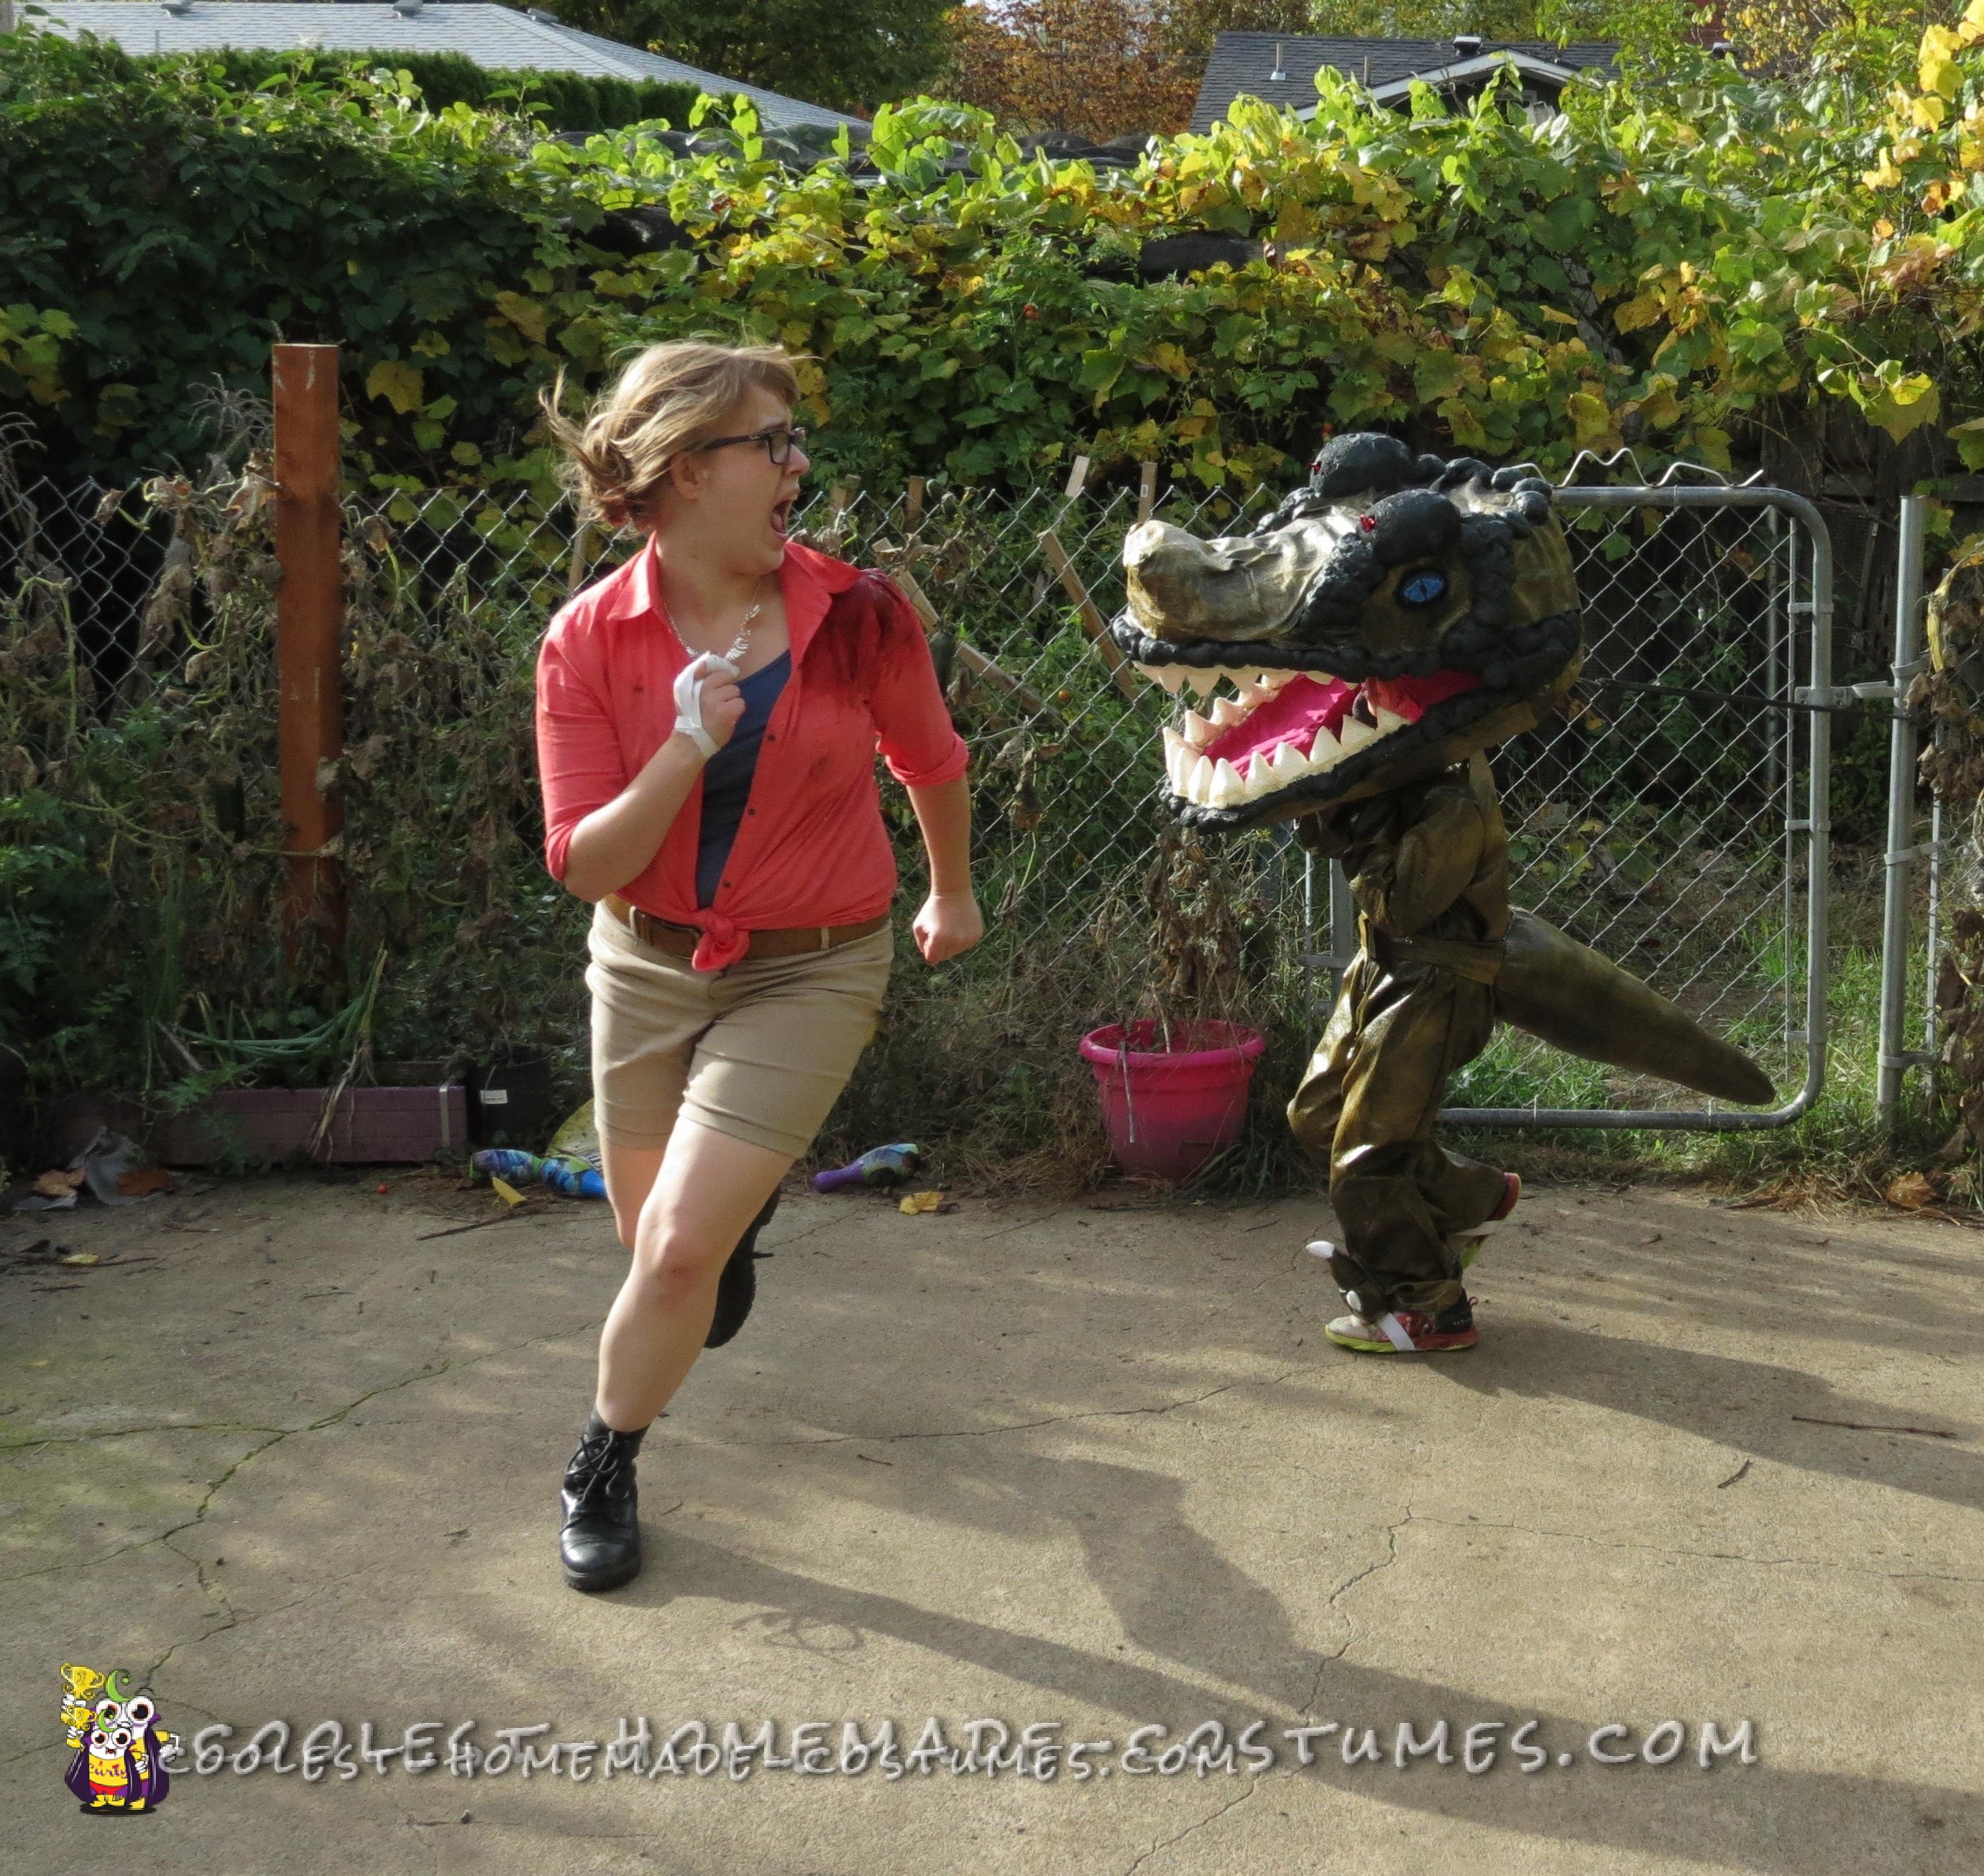 Awesome Jurassic Park Costumes: T-Rex and Ellie